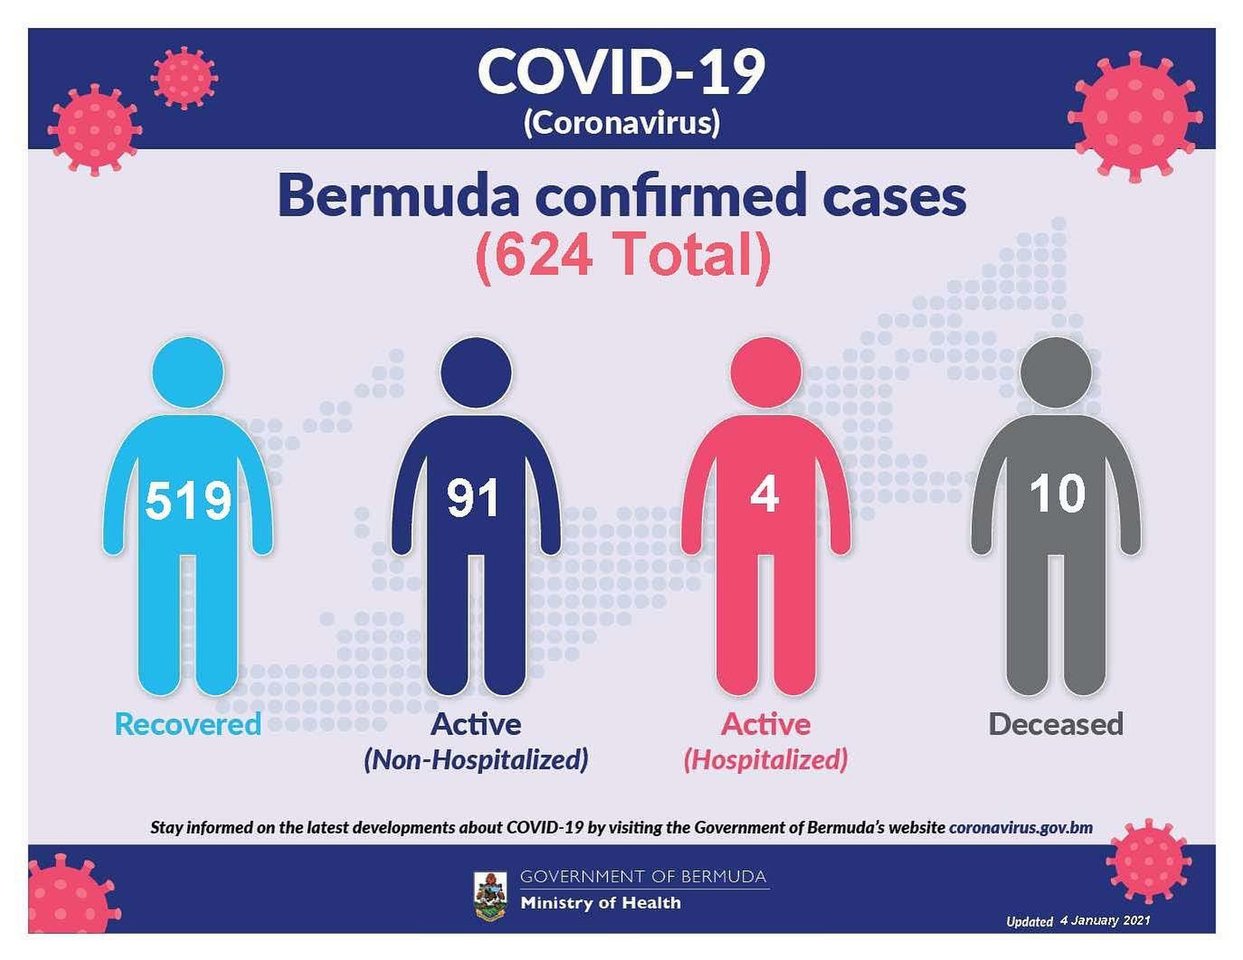 Two new COVID-19 cases reported in Bermuda, 4 January 2021